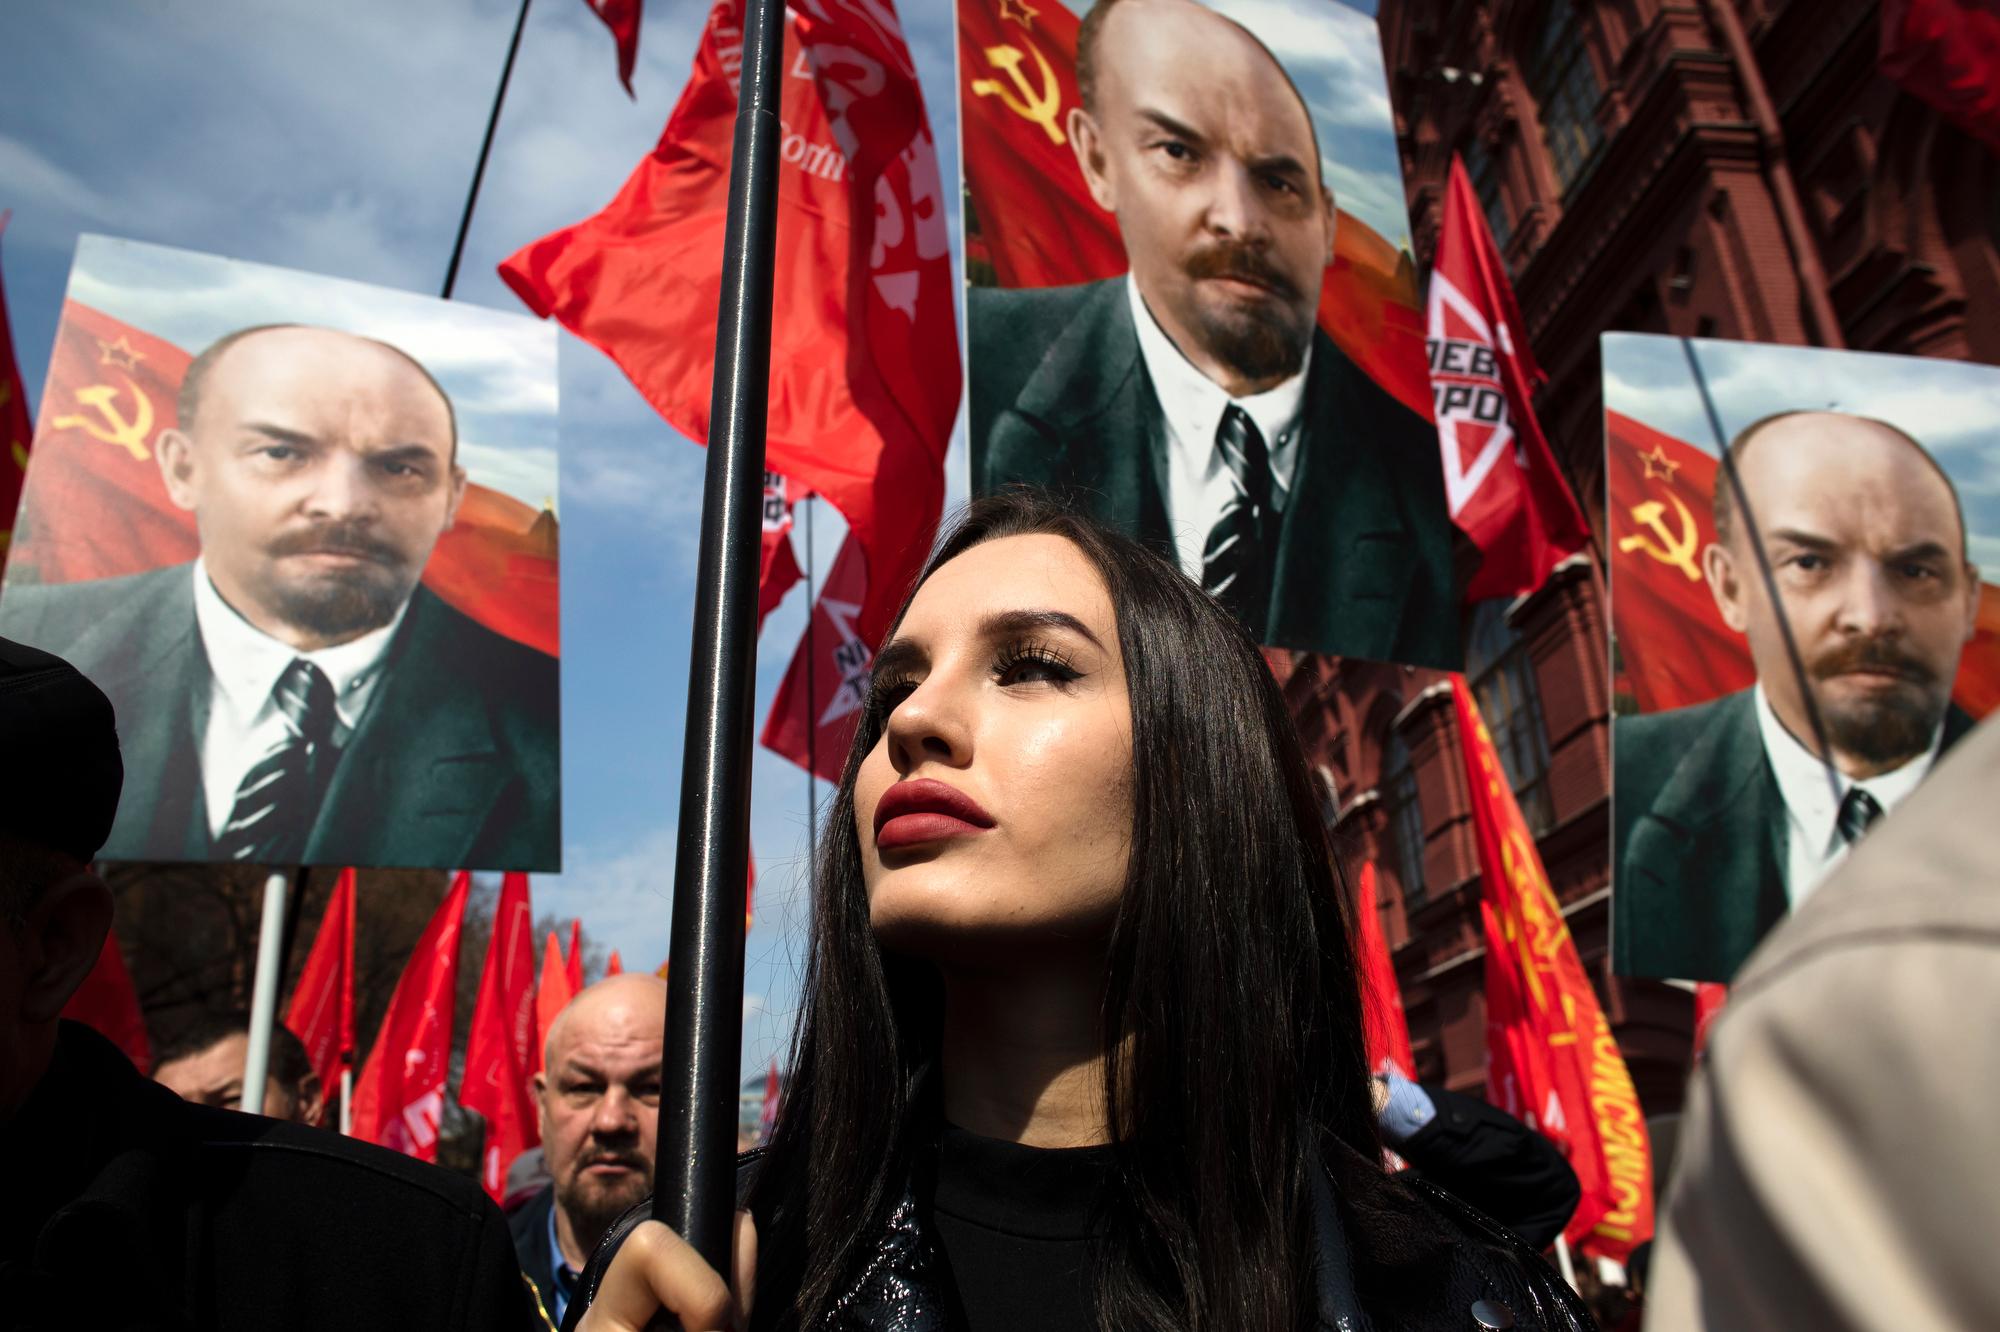 Russian communist supporters hold flags and portraits of Vladimir Lenin as they walk to the mausoleum housing the Soviet founder’s remains to mark the 151st anniversary of his birth on April 22, 2021, in Moscow. (AP Photo/Pavel Golovkin)